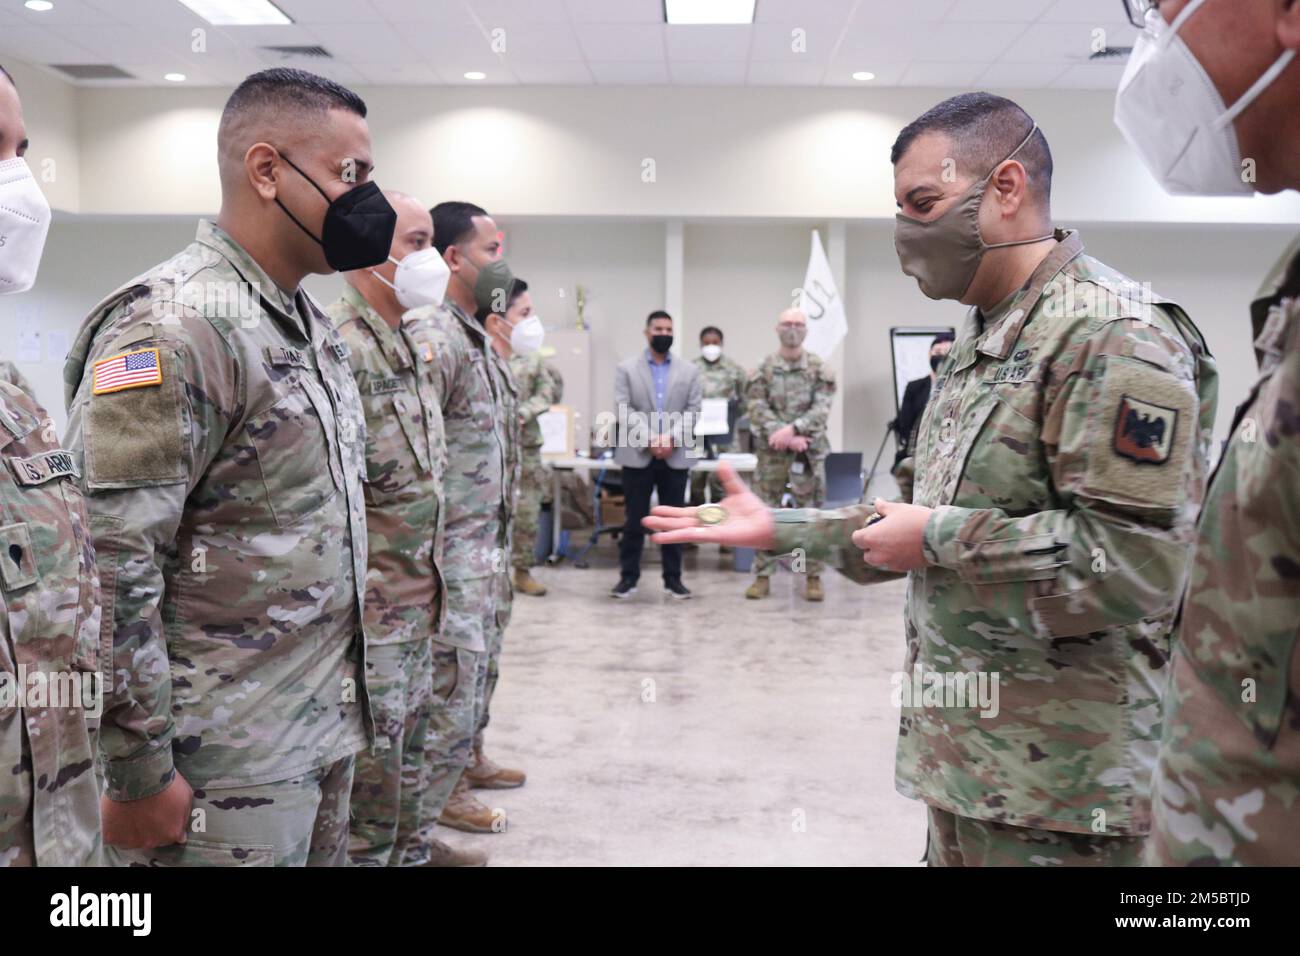 Maj. Gen. John C. Andonie, deputy director of the Army National Guard, extends his hand with a coin of excellence to recognize Sgt. Gamaliel Tavárez for standing out in his tasks as operation noncommissioned officer in different missions of the Joint Task Force - Puerto Rico at Fort Buchanan, Puerto Rico, Feb. 24, 2022. Sgt. Gamaliel Tavárez was in charge to open 40 testing sites around the island to detect COVID-19 positive cases to ensure the citizens’ health and safety and was the operation sergeant of the mass vaccination sites as part of Operation Warp Speed. Stock Photo